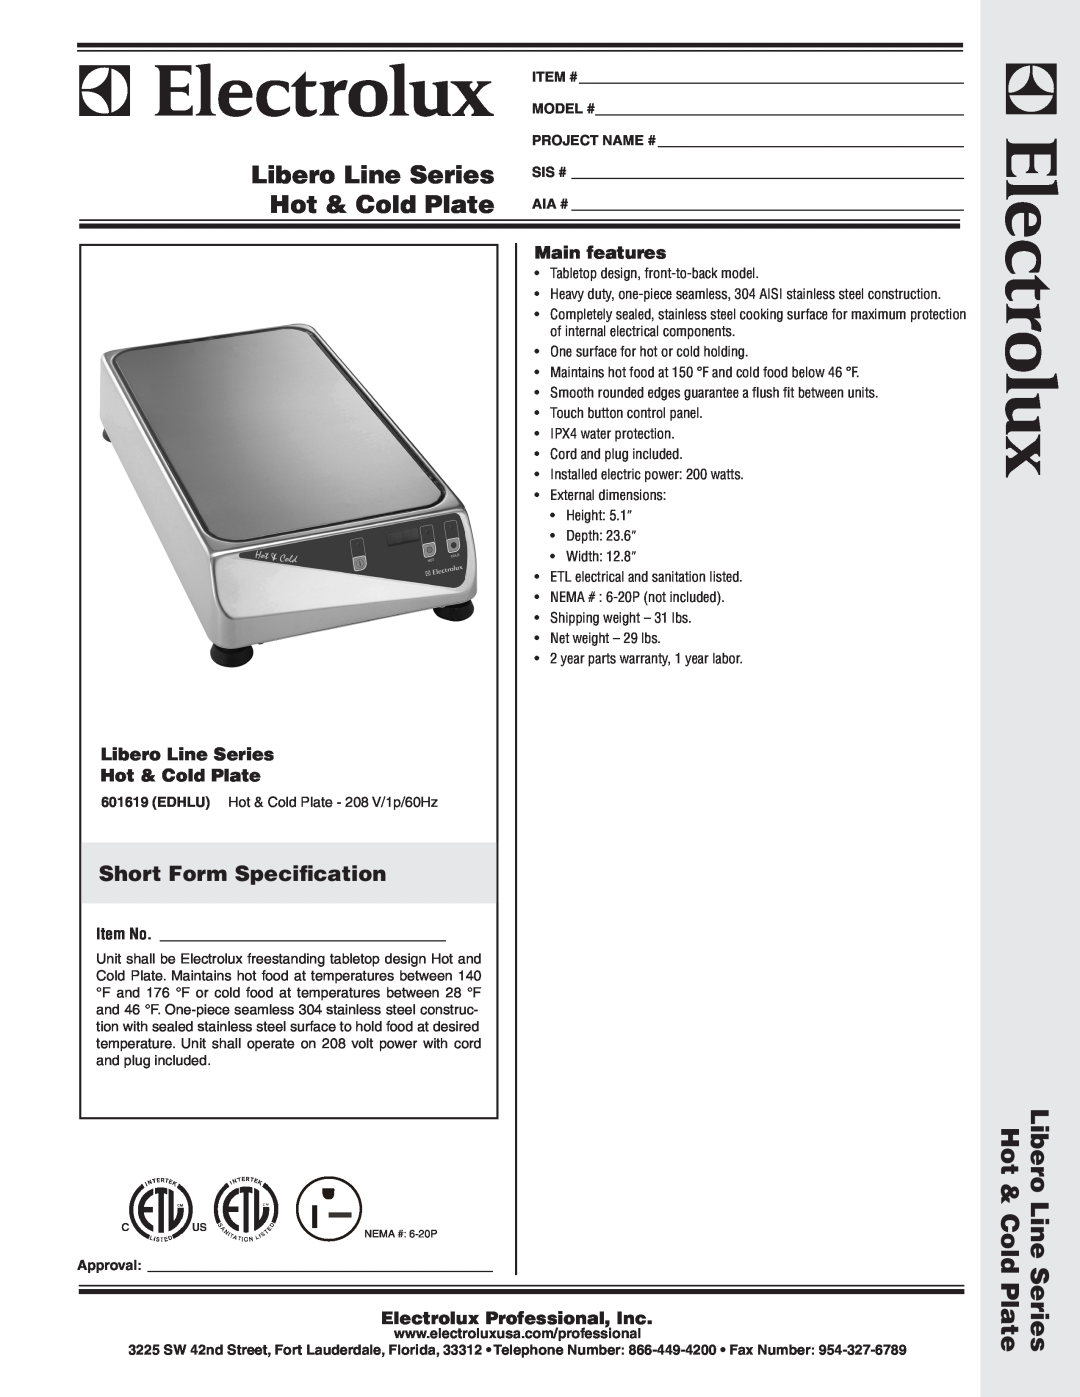 Electrolux 601619, EDHLU dimensions Short Form Specification, Main features, Libero Line Series Hot & Cold Plate, Item No 